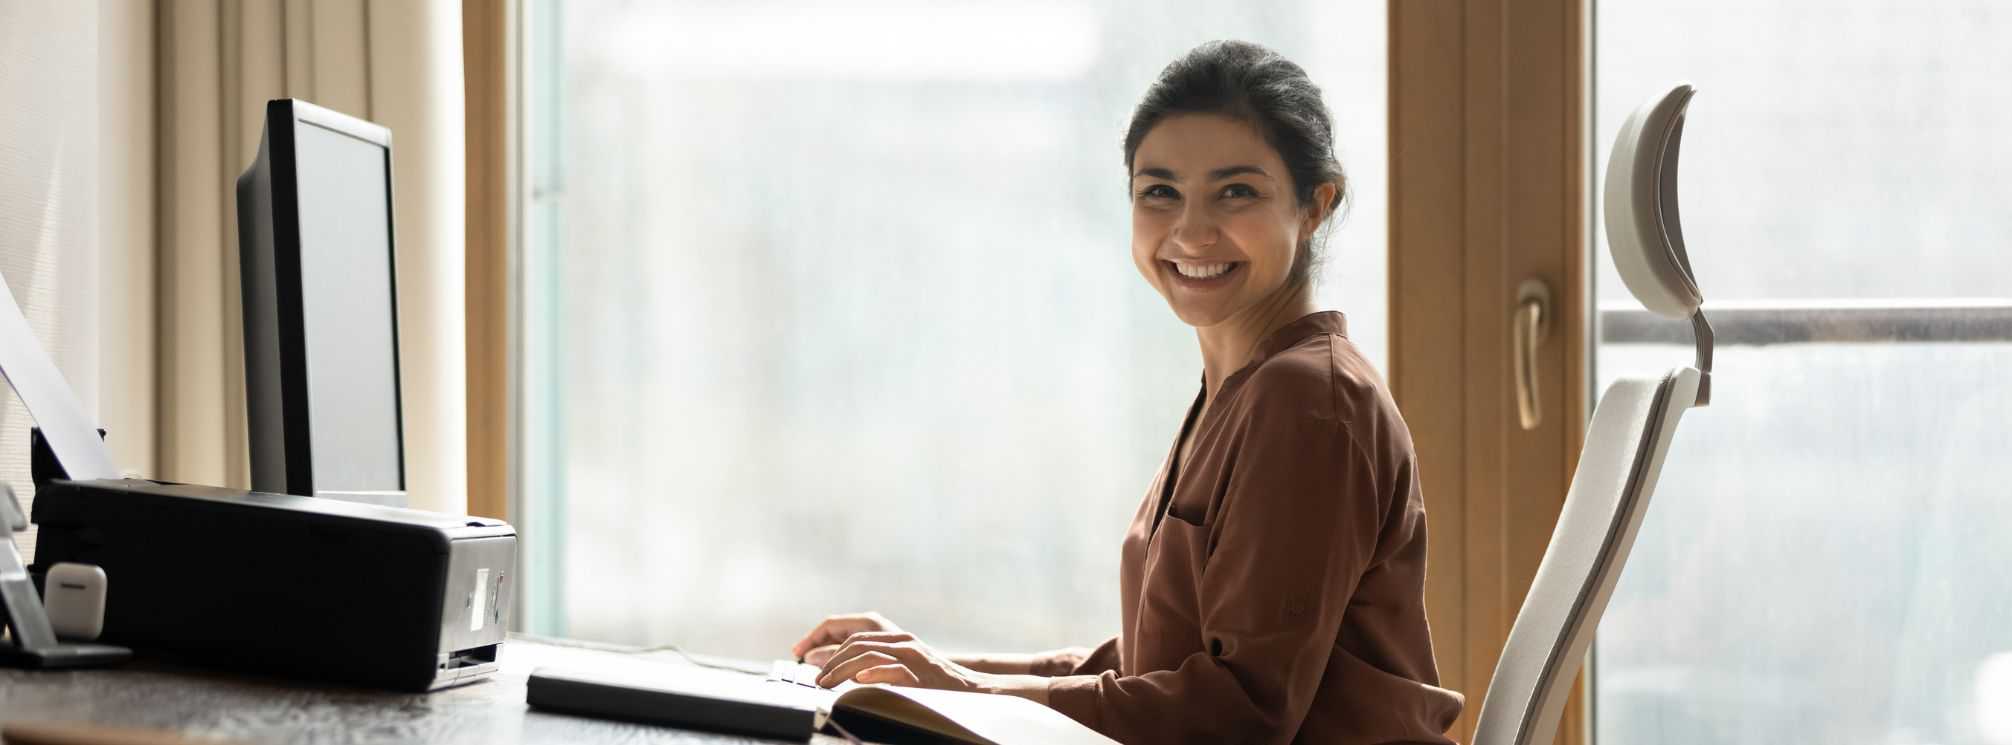 Smiling, happy female employee sitting at her desk and looking at the camera.